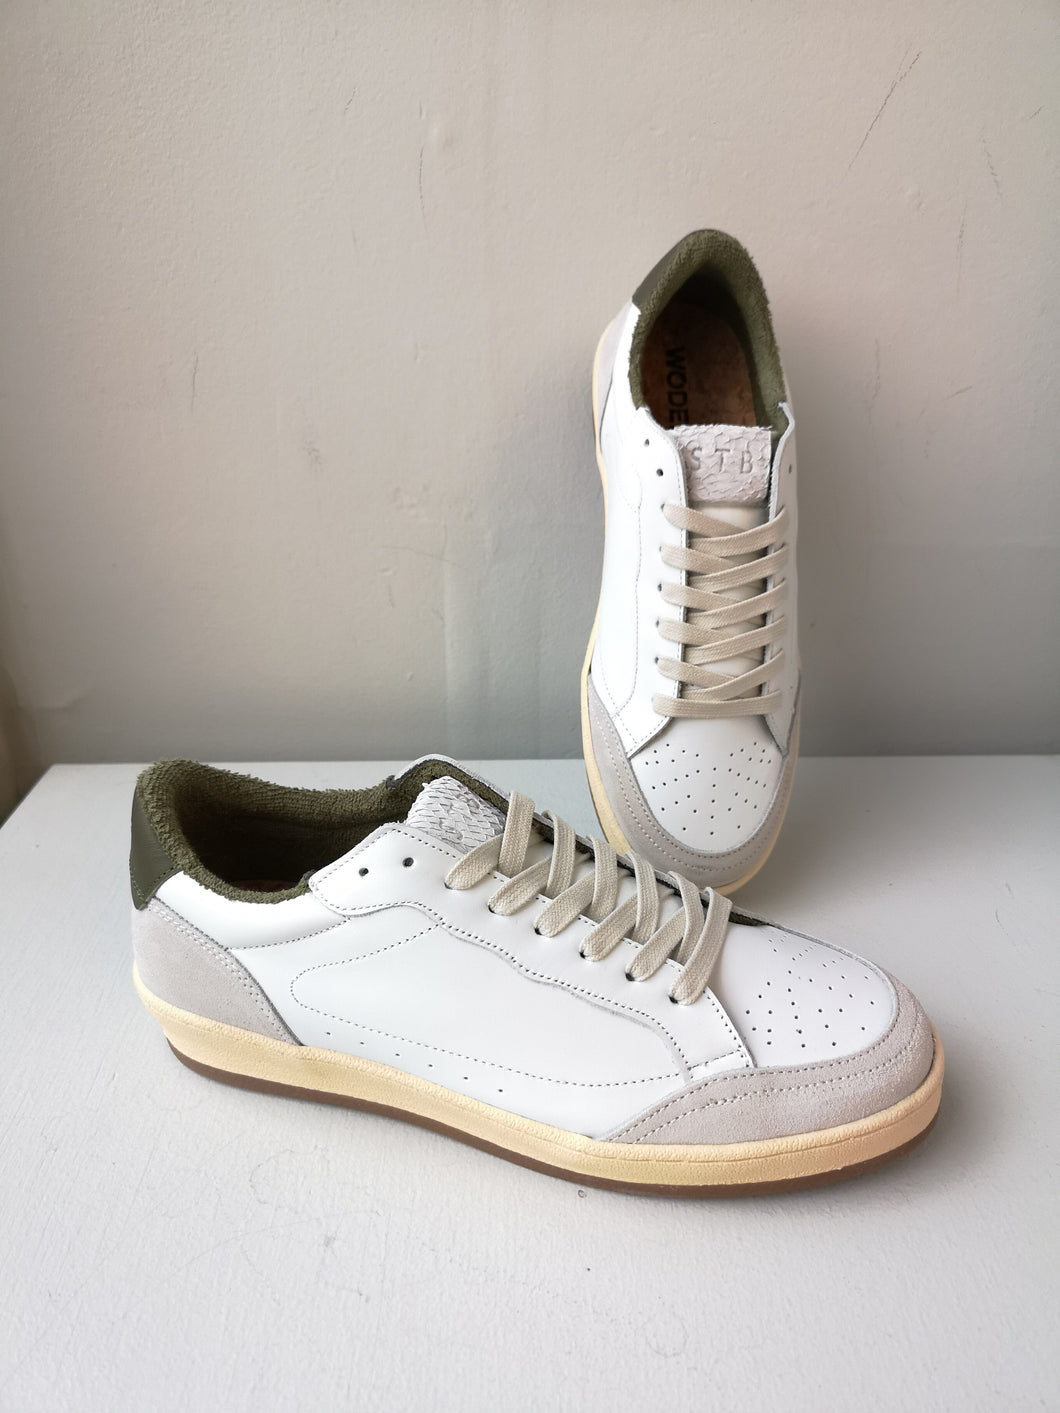 Woden Babtiste Lace Sneaker x STB - White/Green - side and top of sneaker